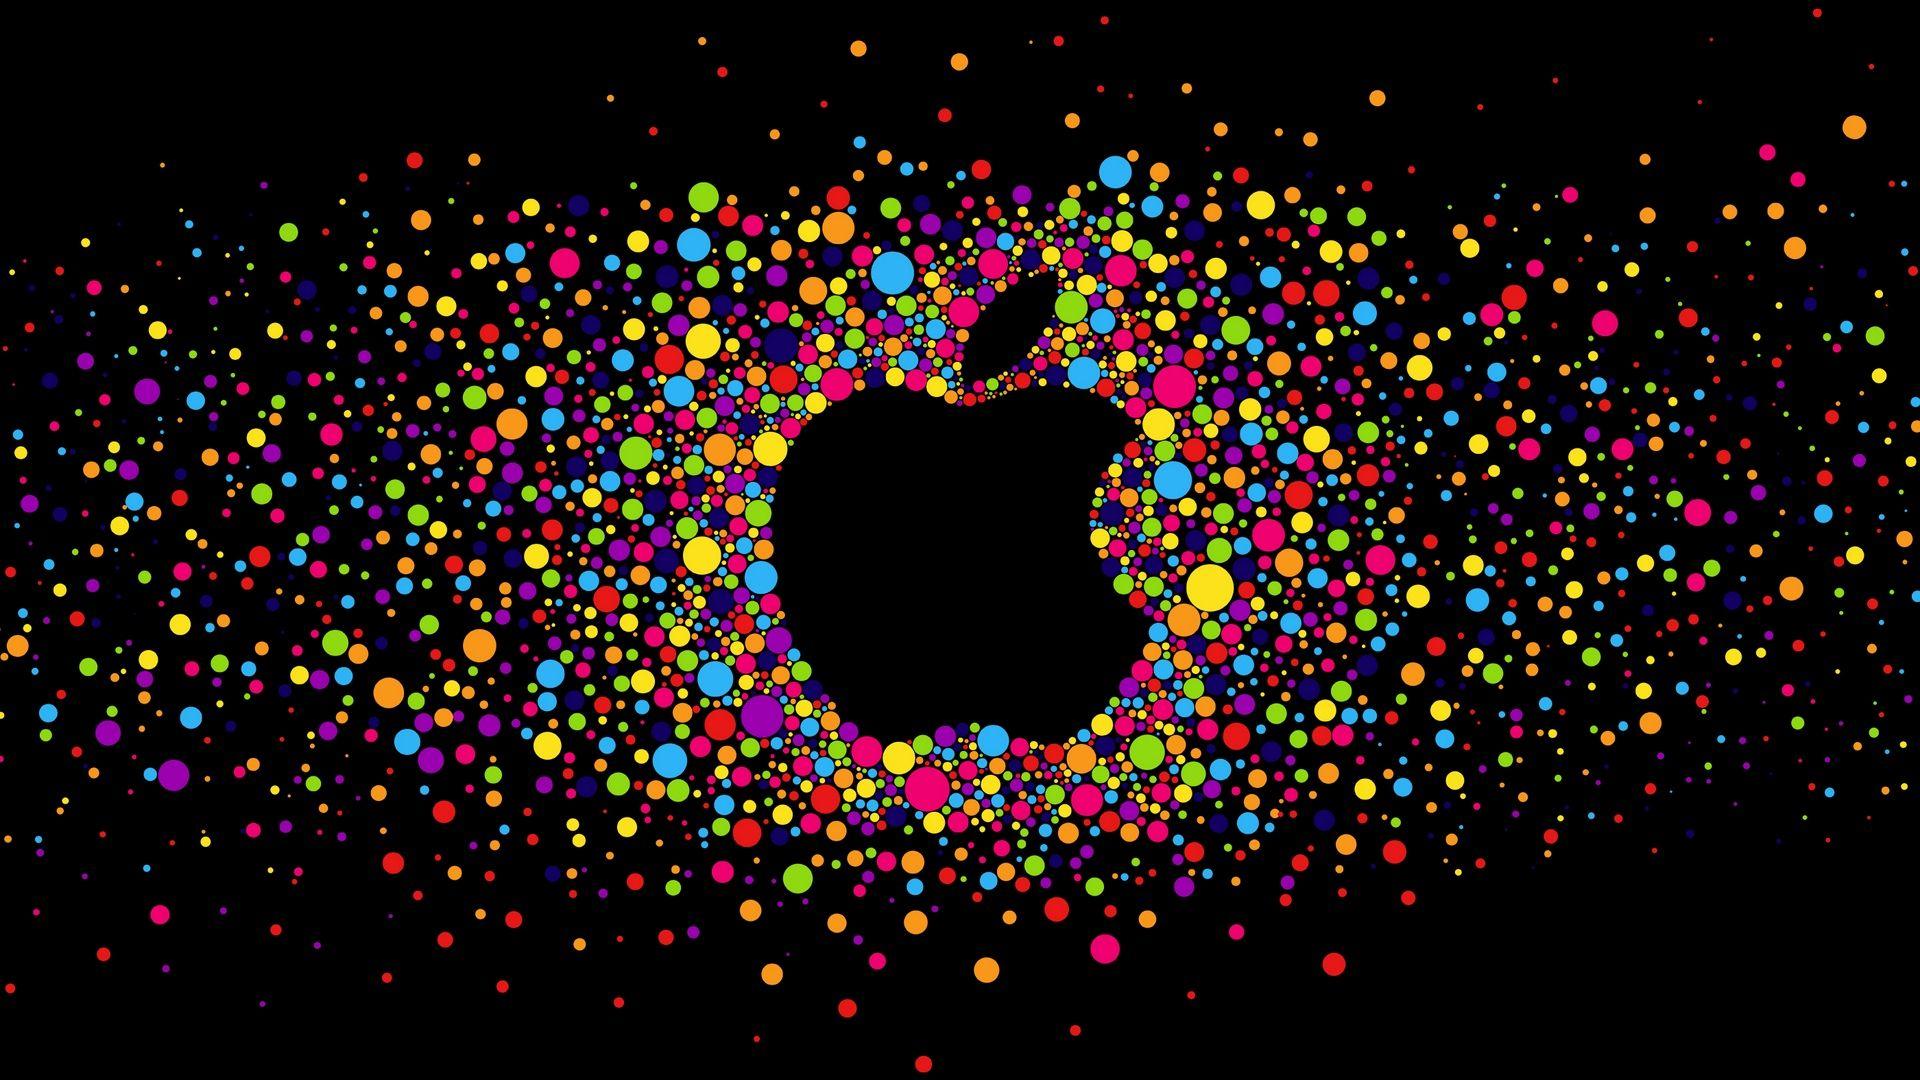 Colorful Circles with Black Background and Apple Logo